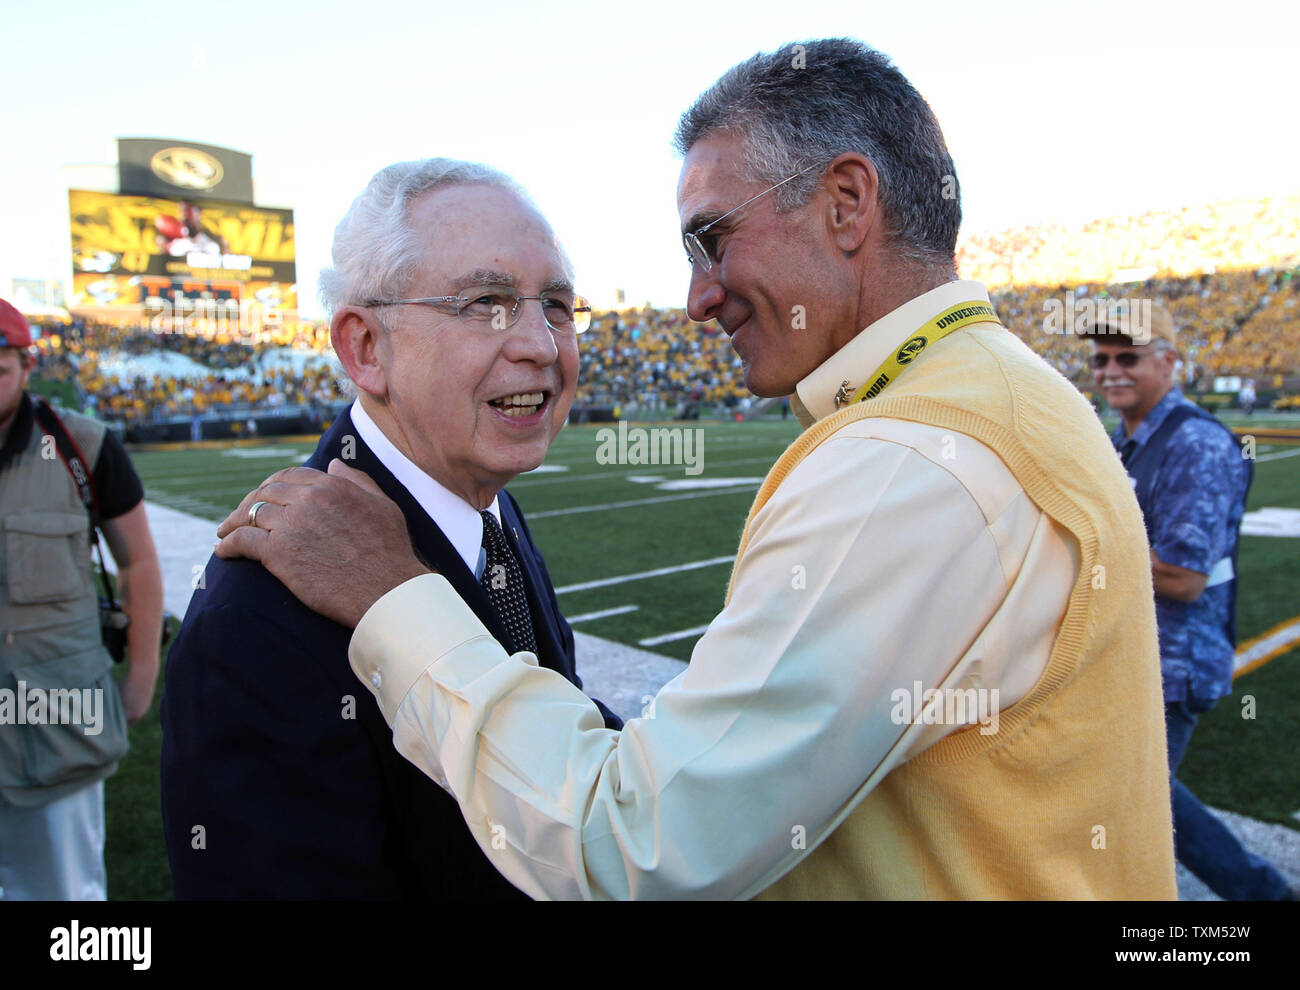 Missouri Athletic Director Mike Alden (R) talks with Southeastern Conference commissioner Mike Slive before Missouri plays Georgia at Faurot Field in Columbia, Missouri on September 8, 2012. This game marks the first for Missouri as a member of the SEC Conference. UPI/Bill Greenblatt Stock Photo